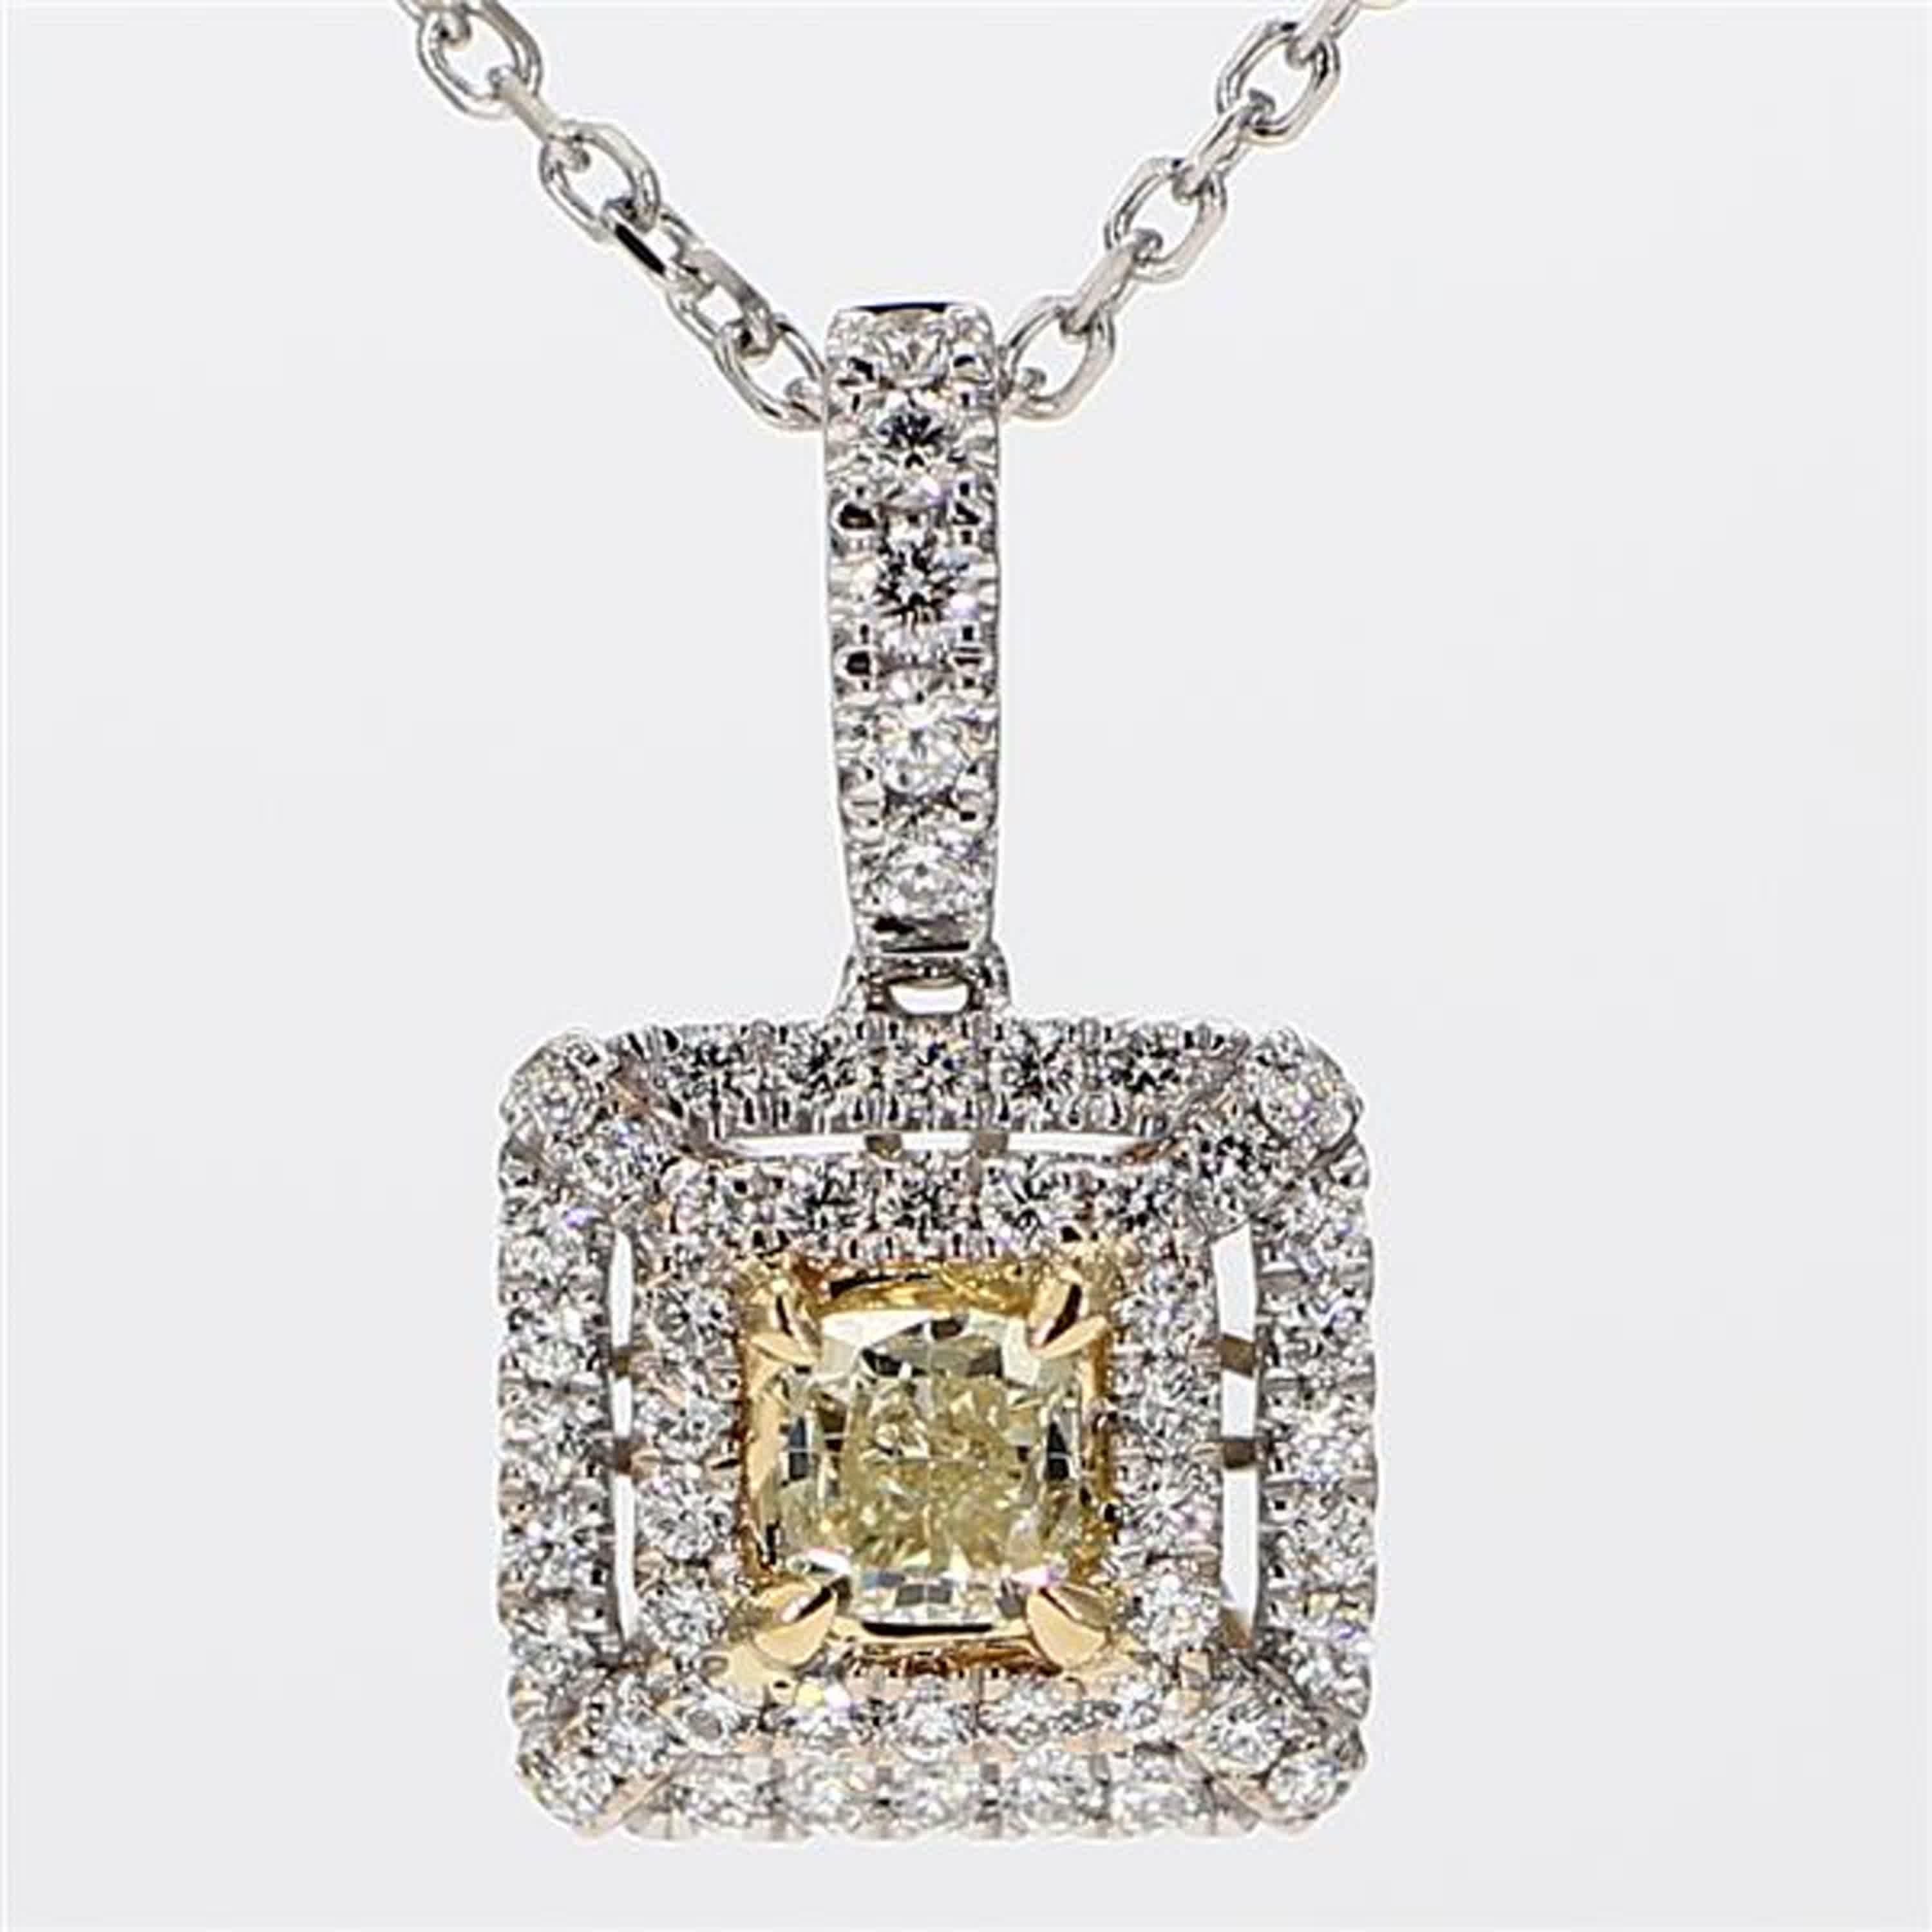 RareGemWorld's intriguing diamond pendant. Mounted in a beautiful 18K Yellow and White Gold setting with a natural cushion cut yellow diamond. The yellow diamond is surrounded by round natural white diamond melee. This pendant is guaranteed to